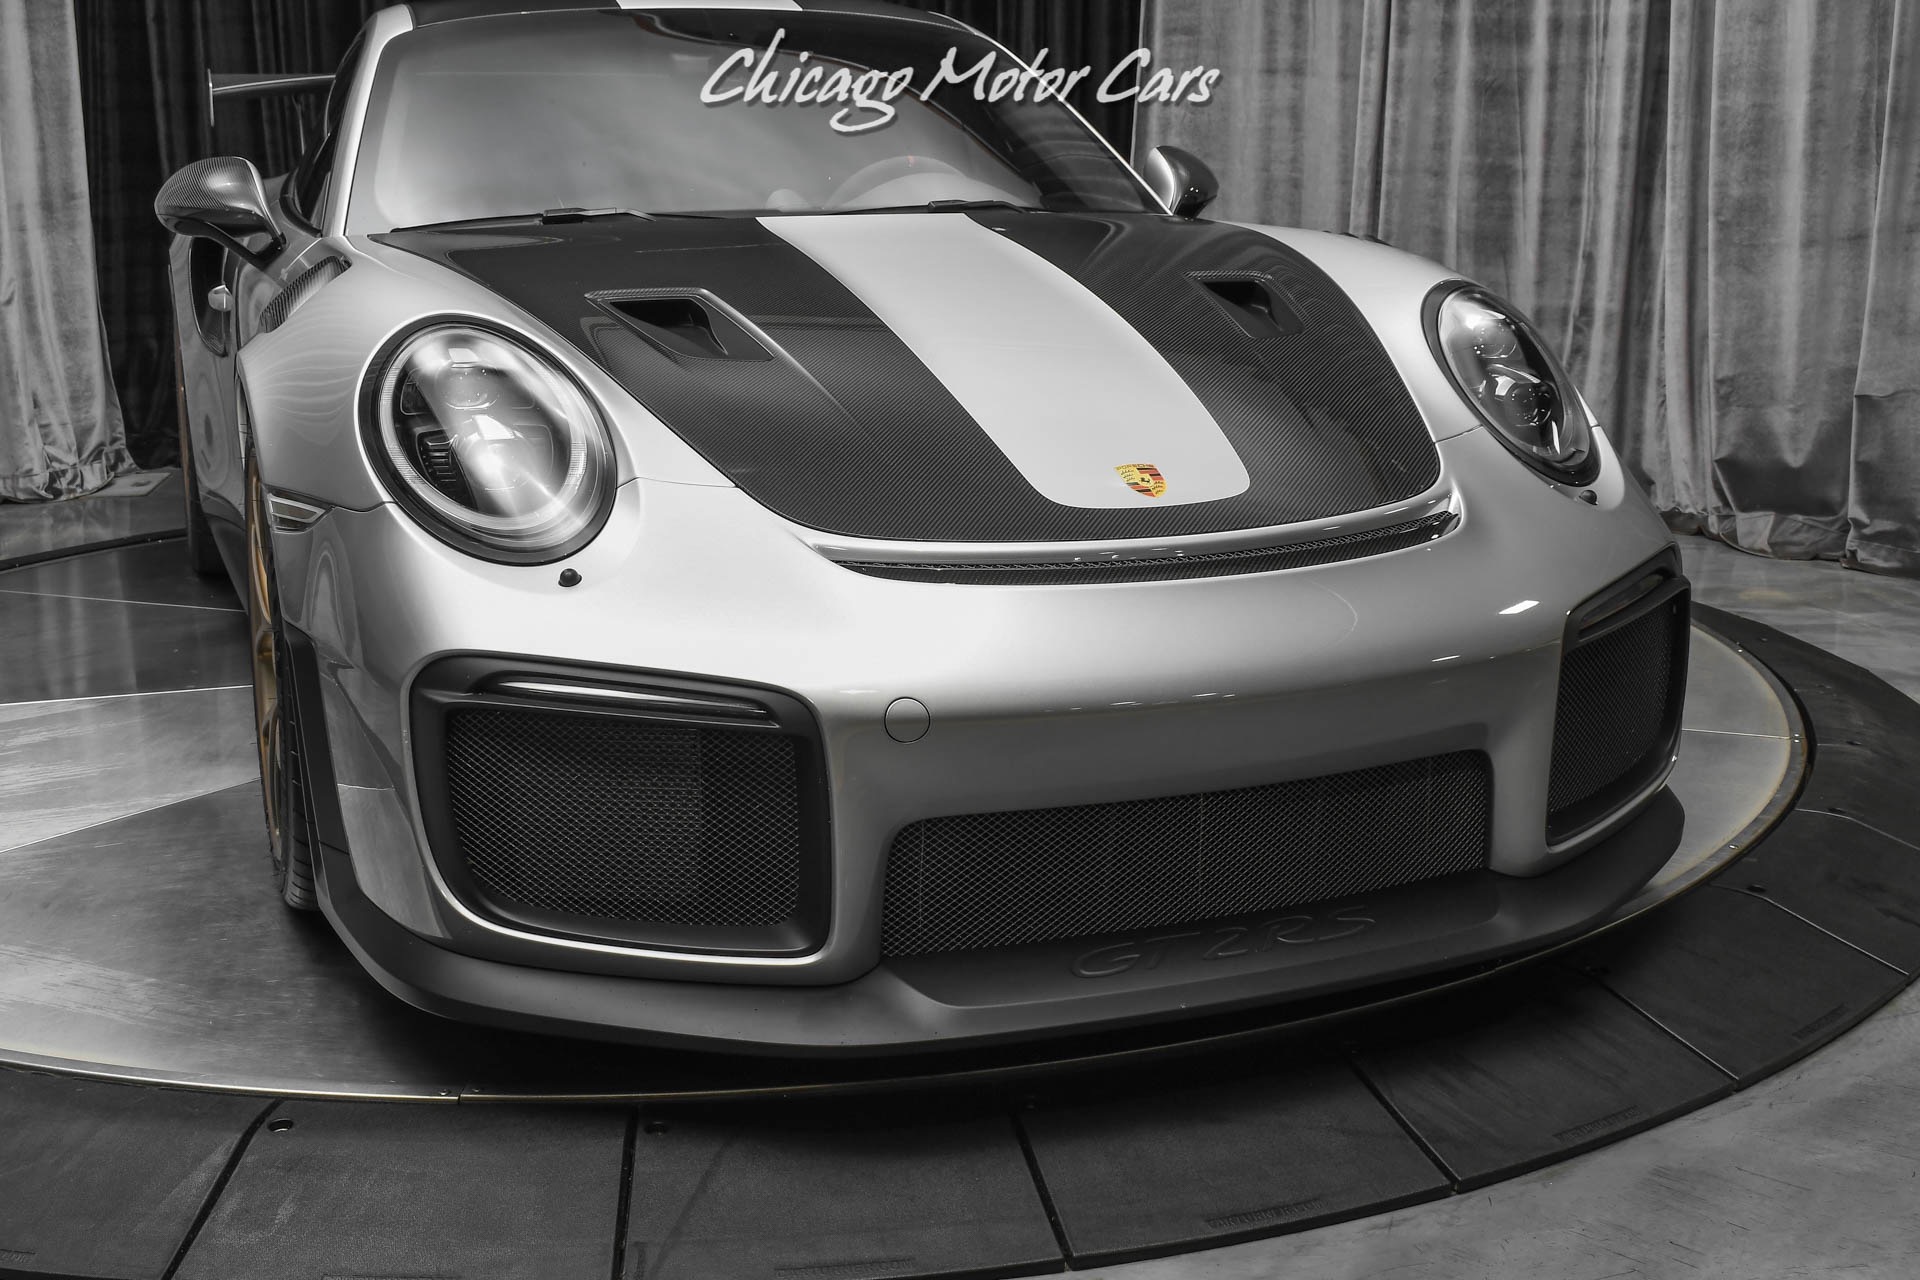 Used-2018-Porsche-911-GT2-RS-Weissach-pkg-Full-Body-Xpel-PPF-HREs-Only-6K-Miles